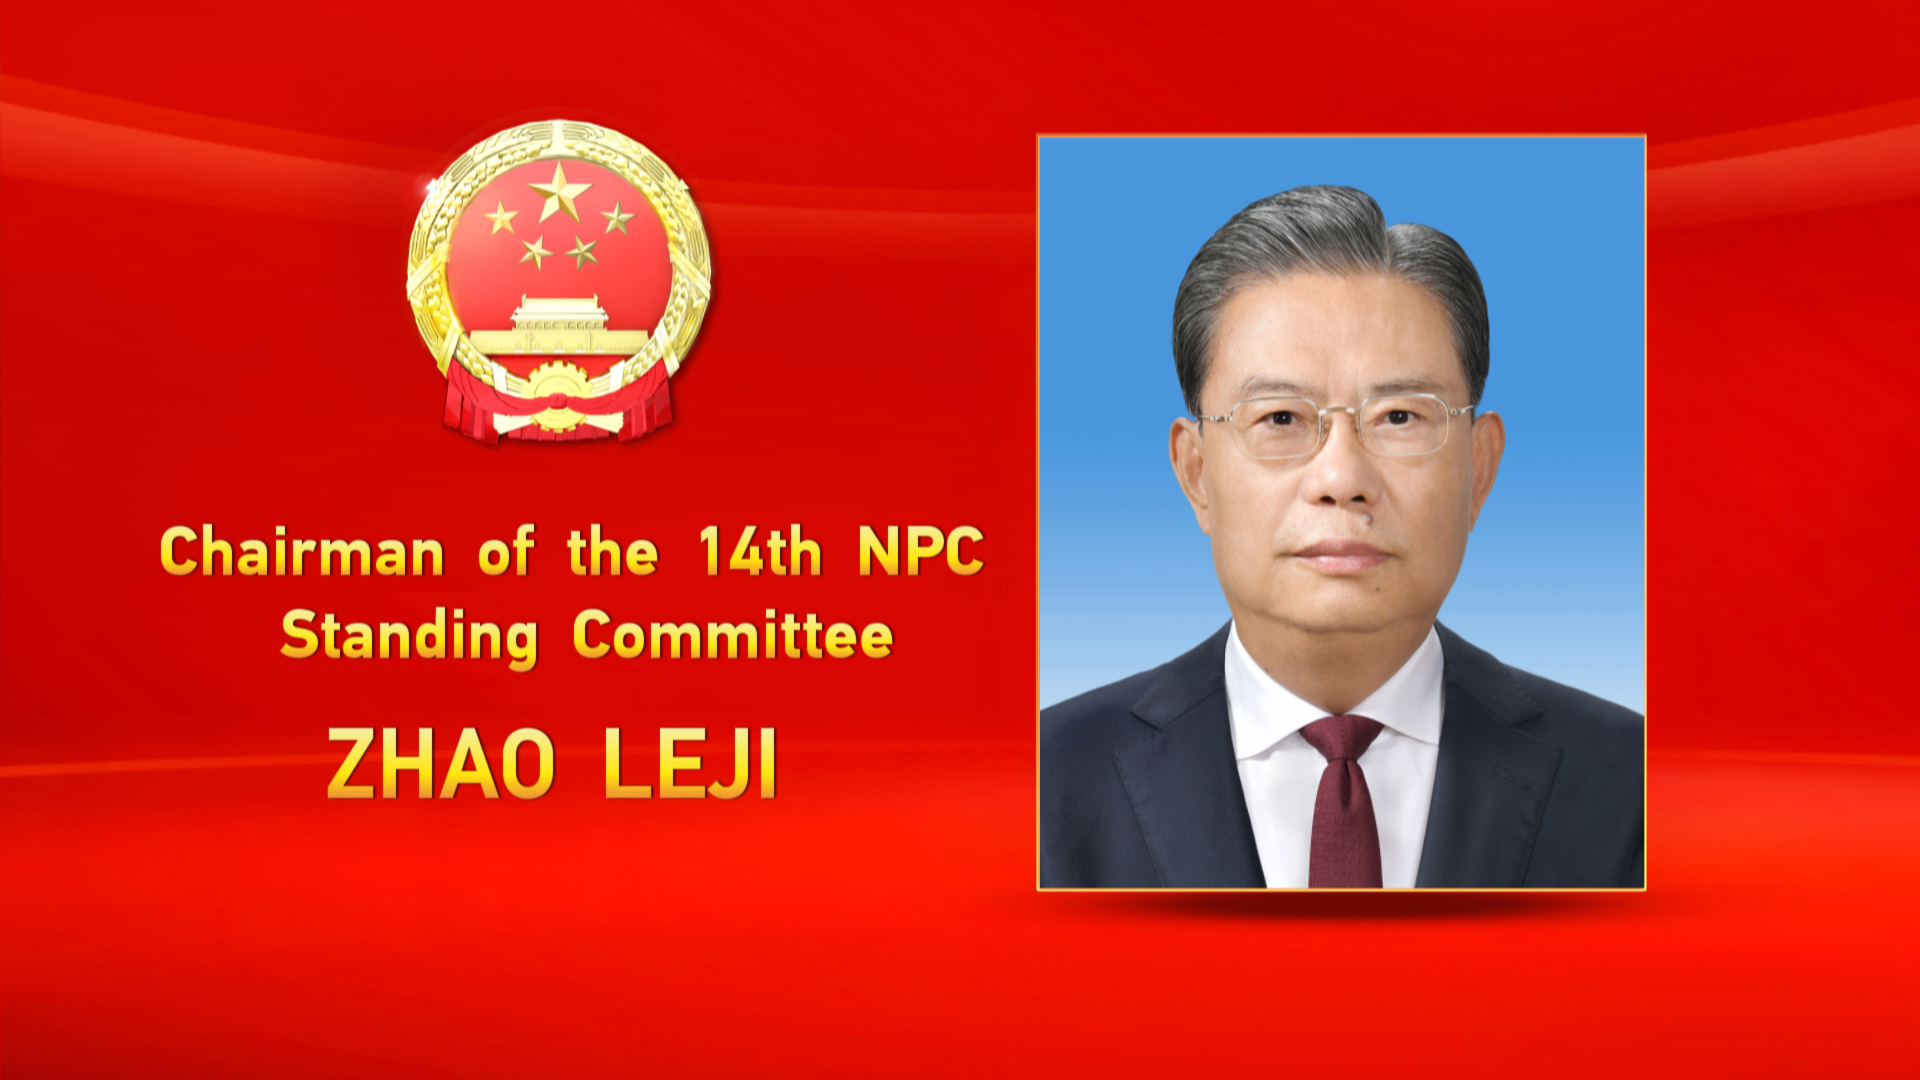 Brief introduction of Zhao Leji – chairman of 14th NPC Standing Committee